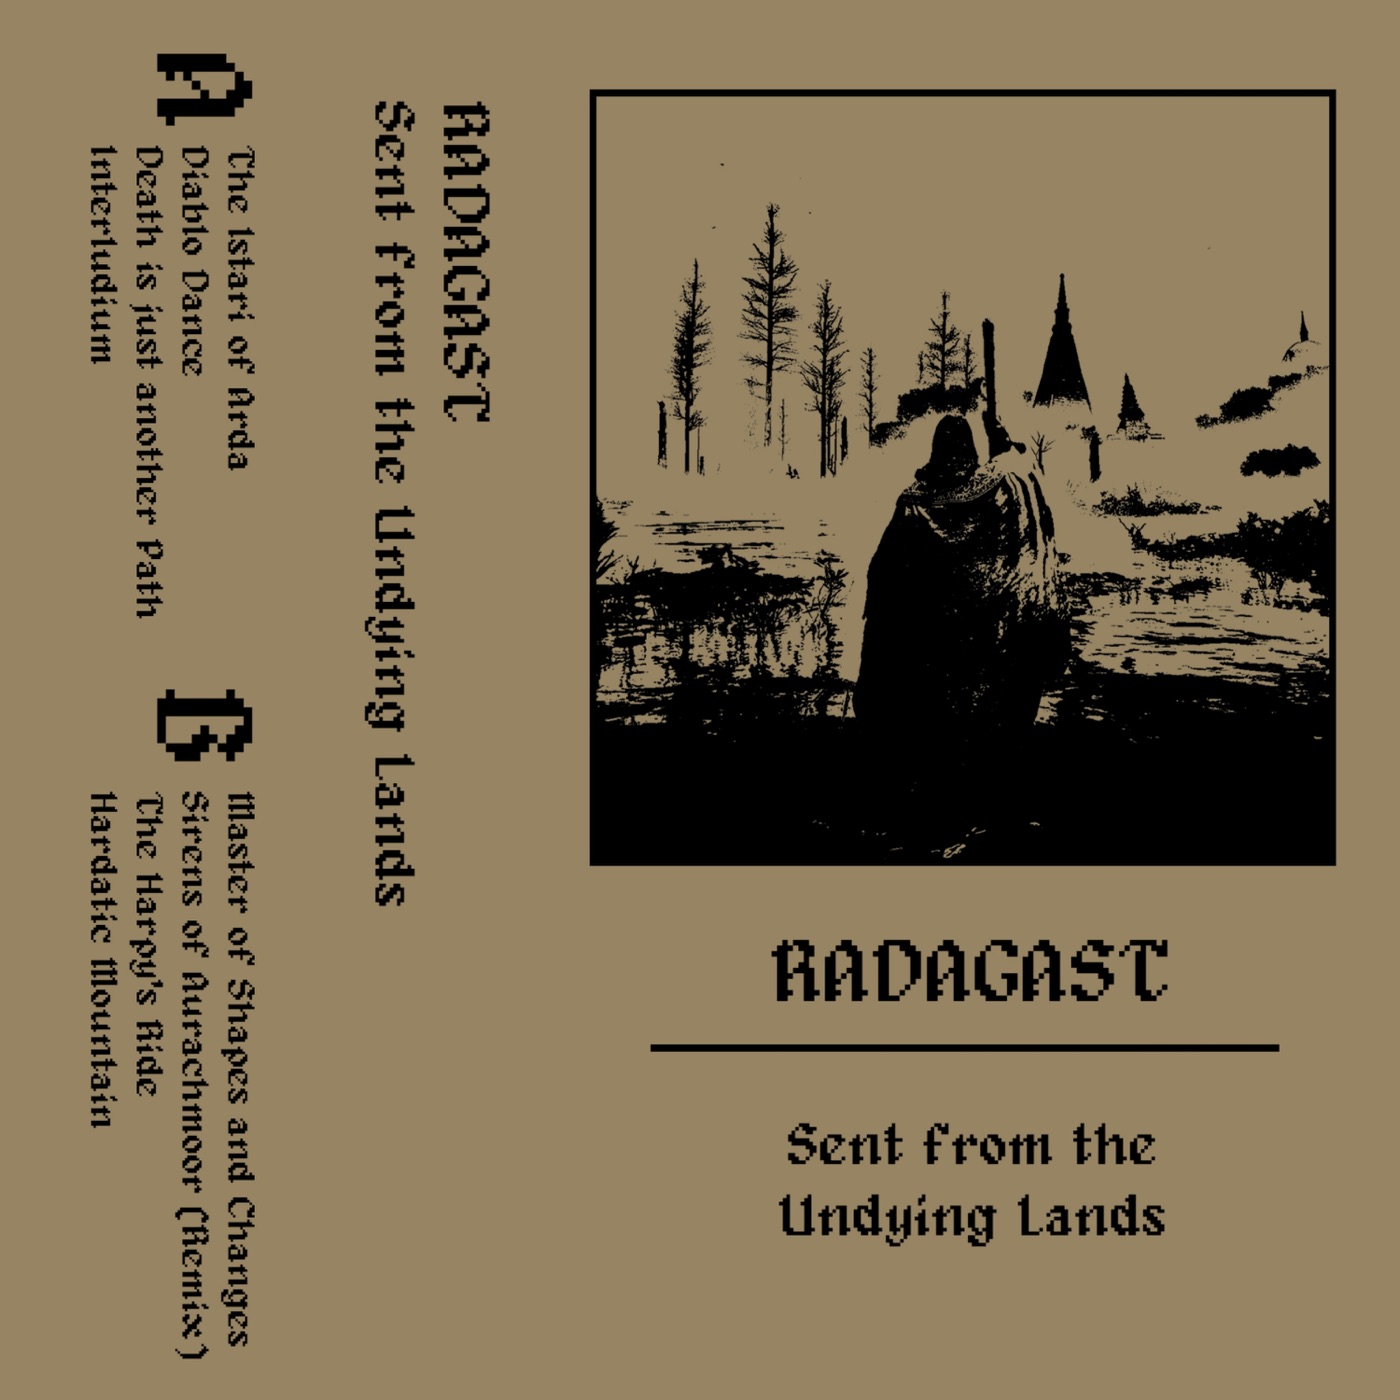 Sent from the Undying Lands by Radagast